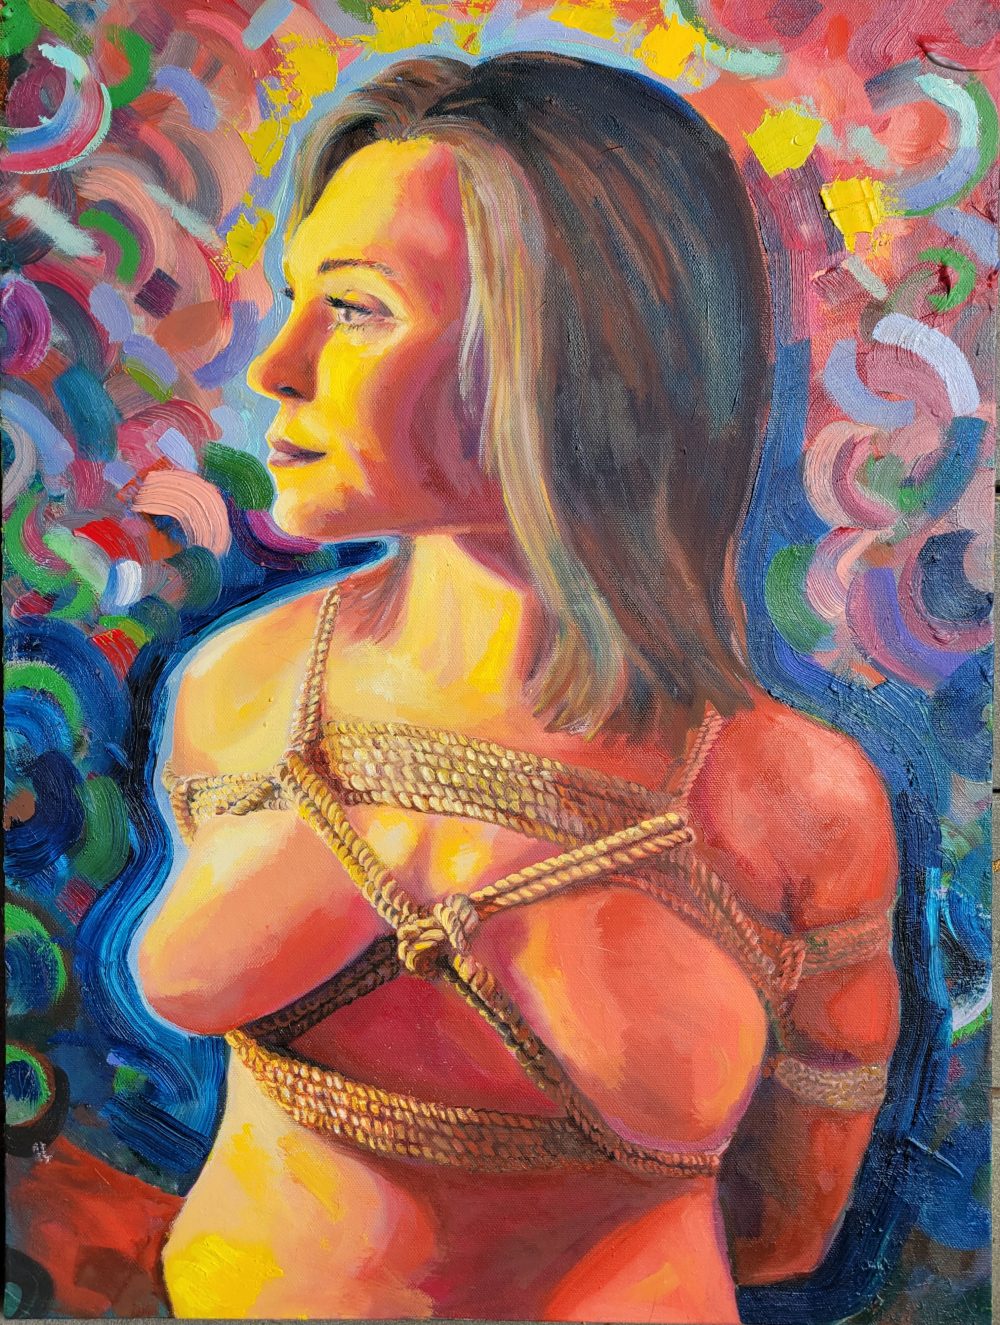 An oil painting portrait with bright yellow lighting illuminating a young women tied in a decorative and mildly constricting shibari chest harness, she looks away from the viewer her tied chest prominently facing the onlooker.